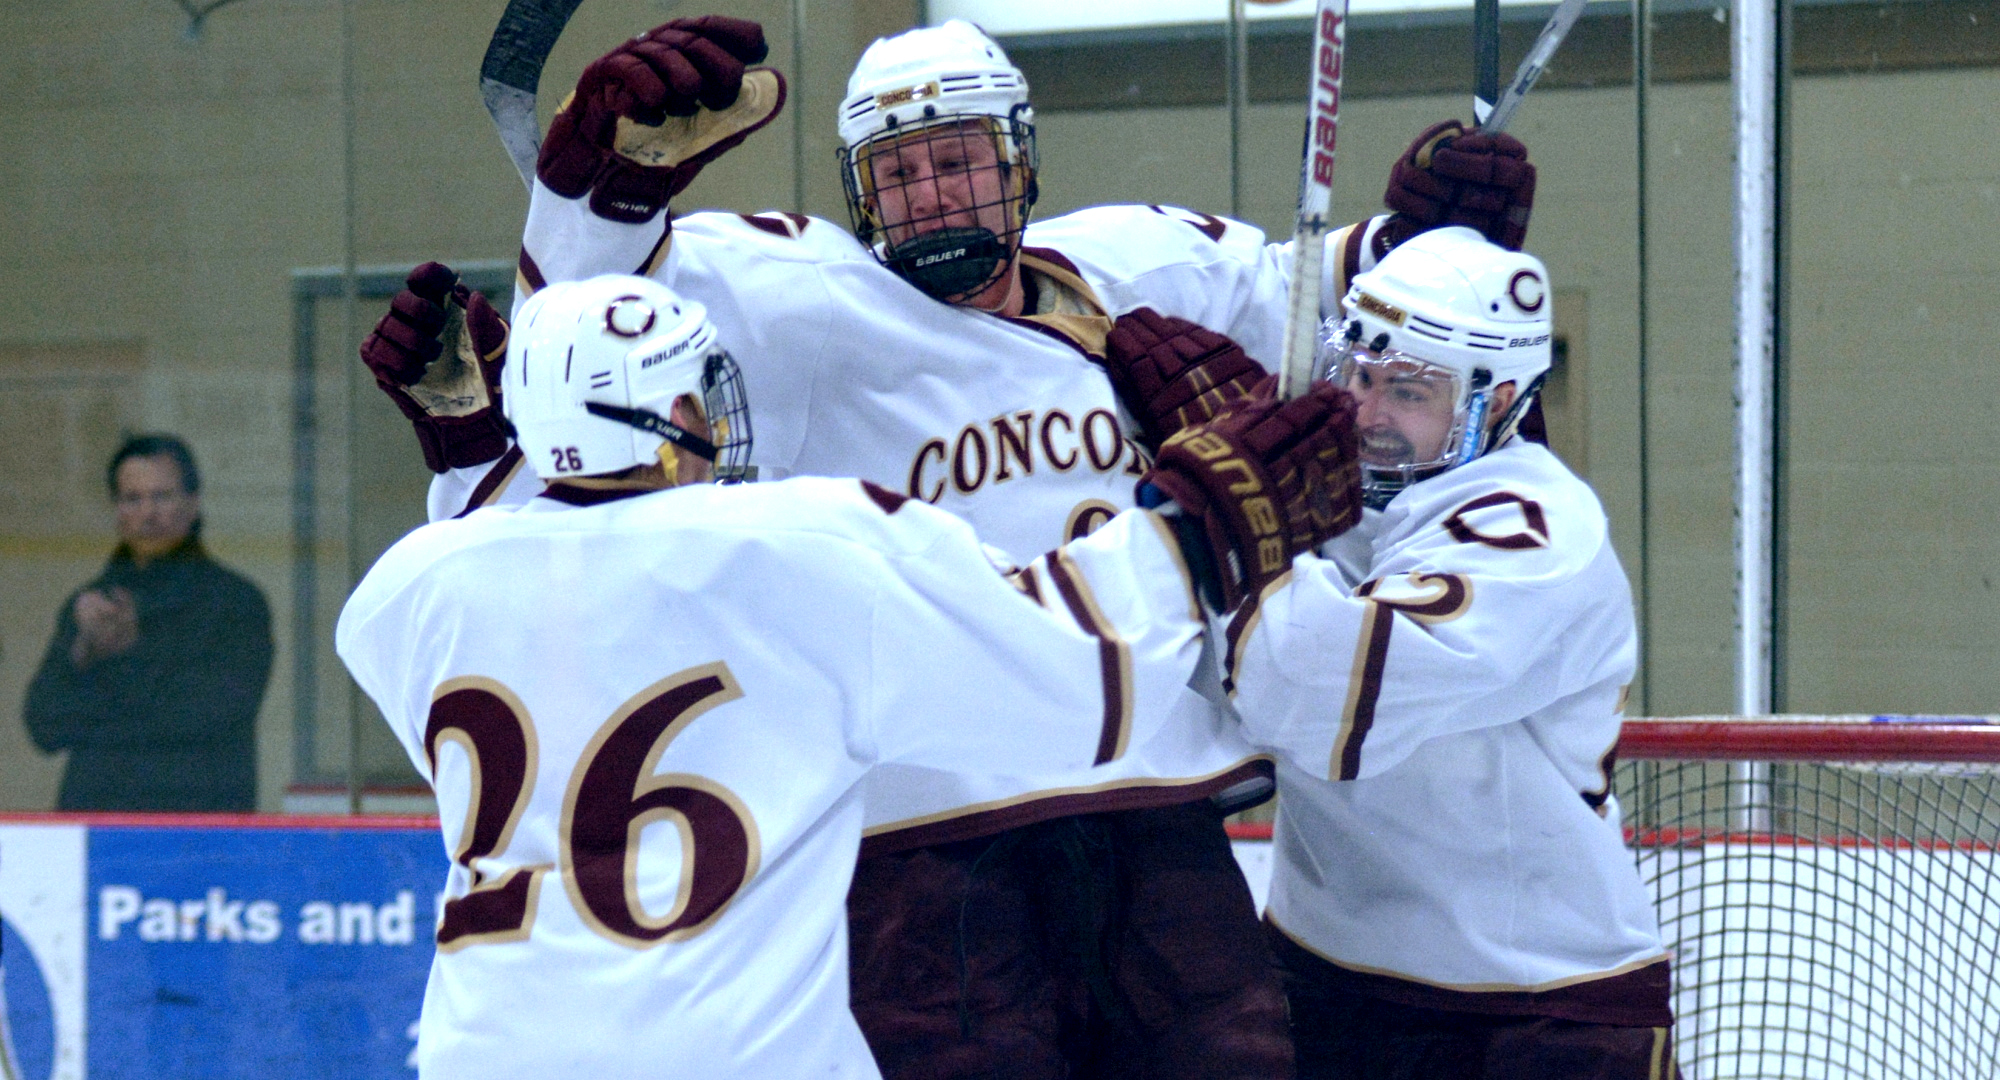 Jon Grebosky celebrates his third-period goal against Hamline with teammates Connor Kelly (R) and Quinn Fuchs (#26) during the Cobbers' shootout win over the Pipers.